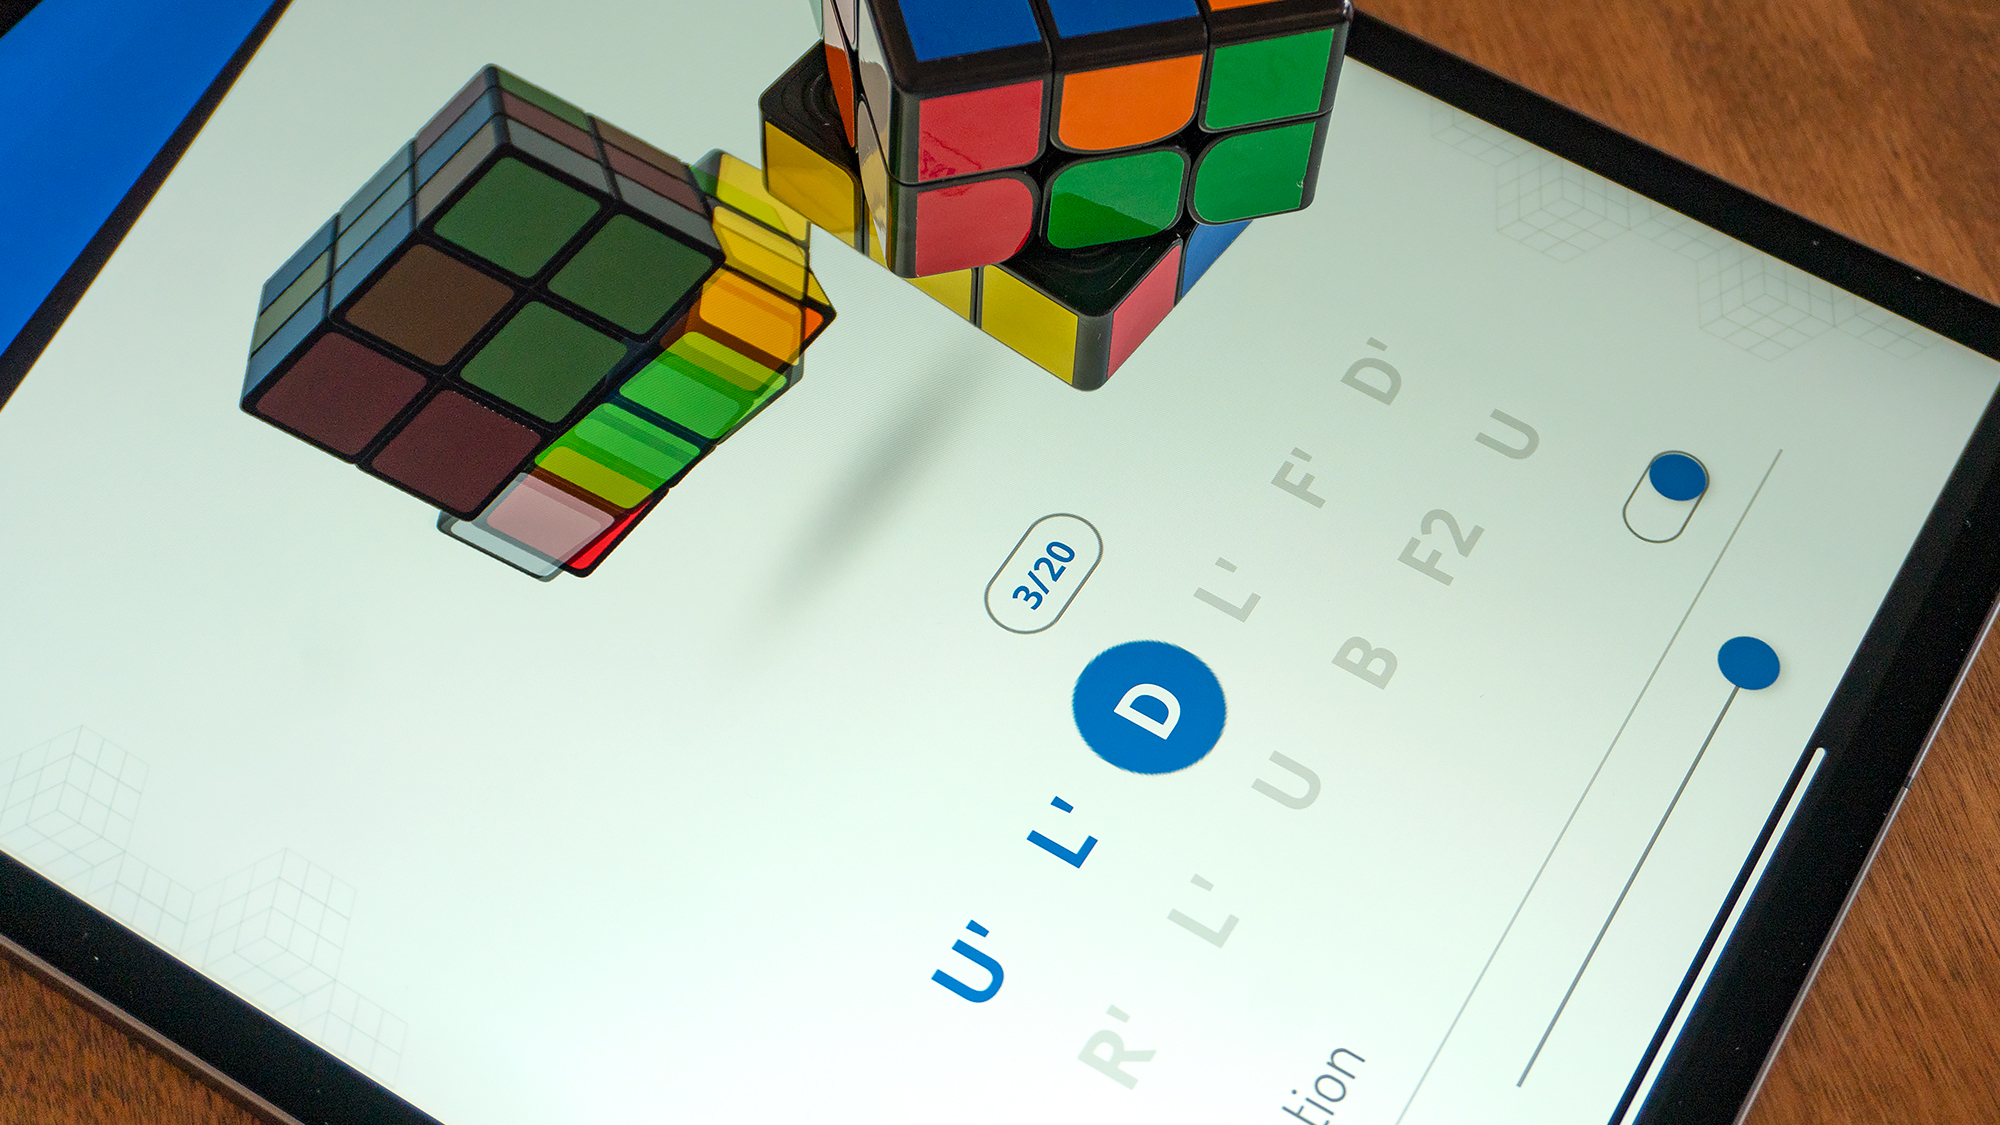 The Rubik's Connected mobile app tracks every move you make in real time, so as you're learning to solve it, you'll immediately know when you've made a mistake and can quickly get back on track. (Photo: Andrew Liszewski/Gizmodo)